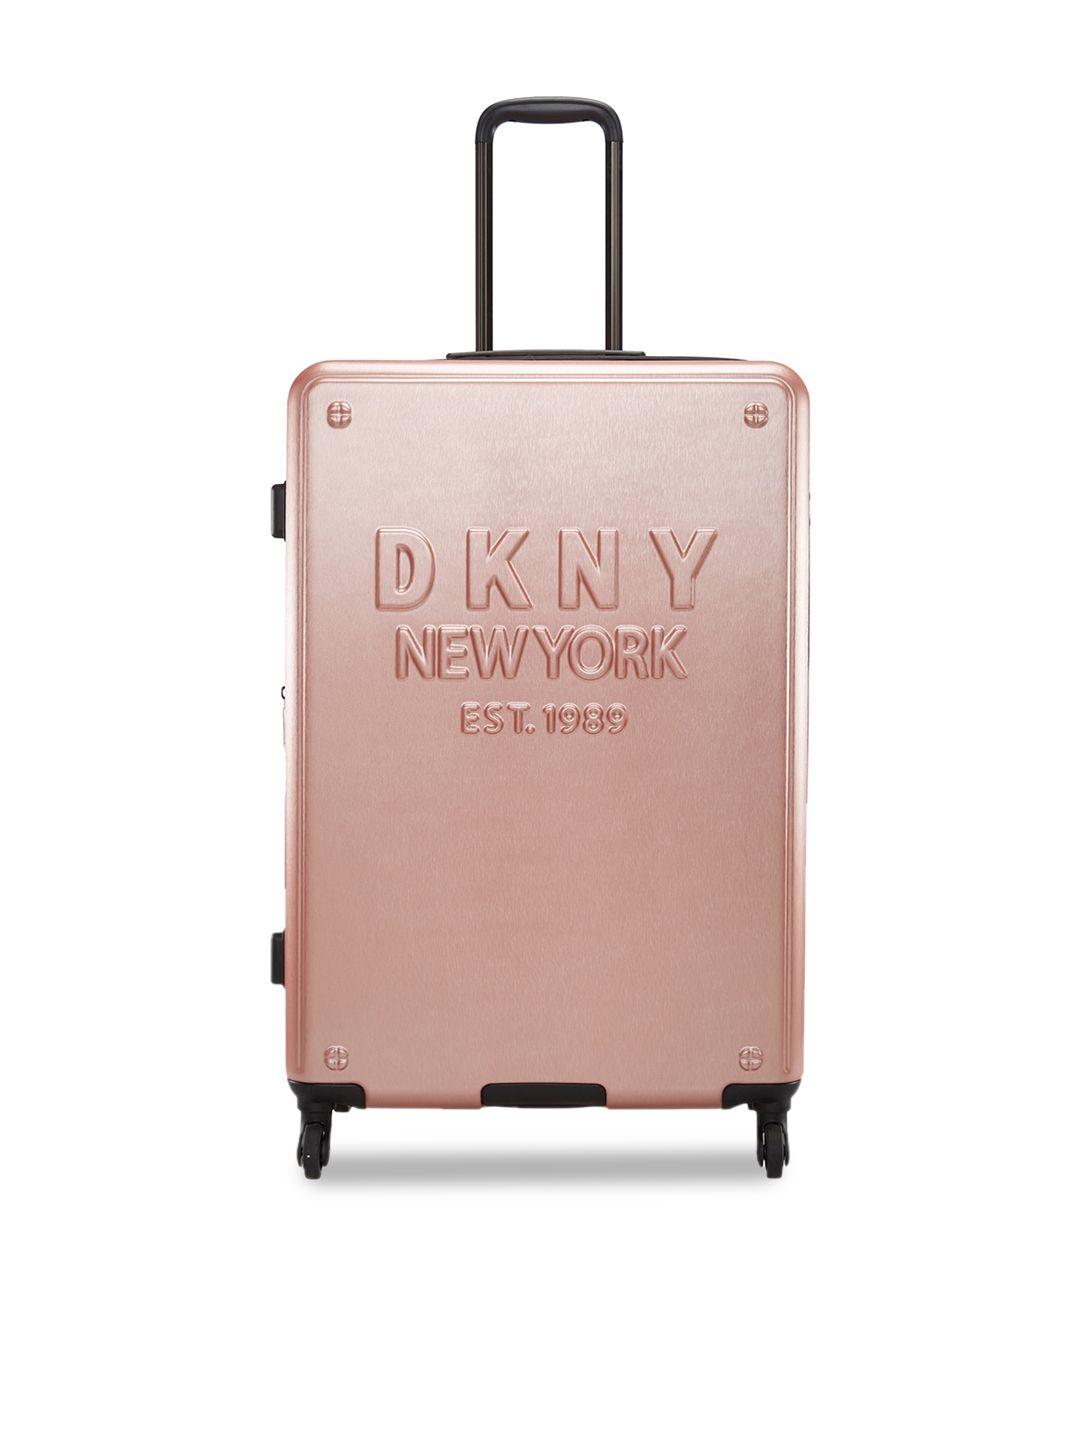 dkny textured abs material finish hard sided polycarbonate large trolley suitcase